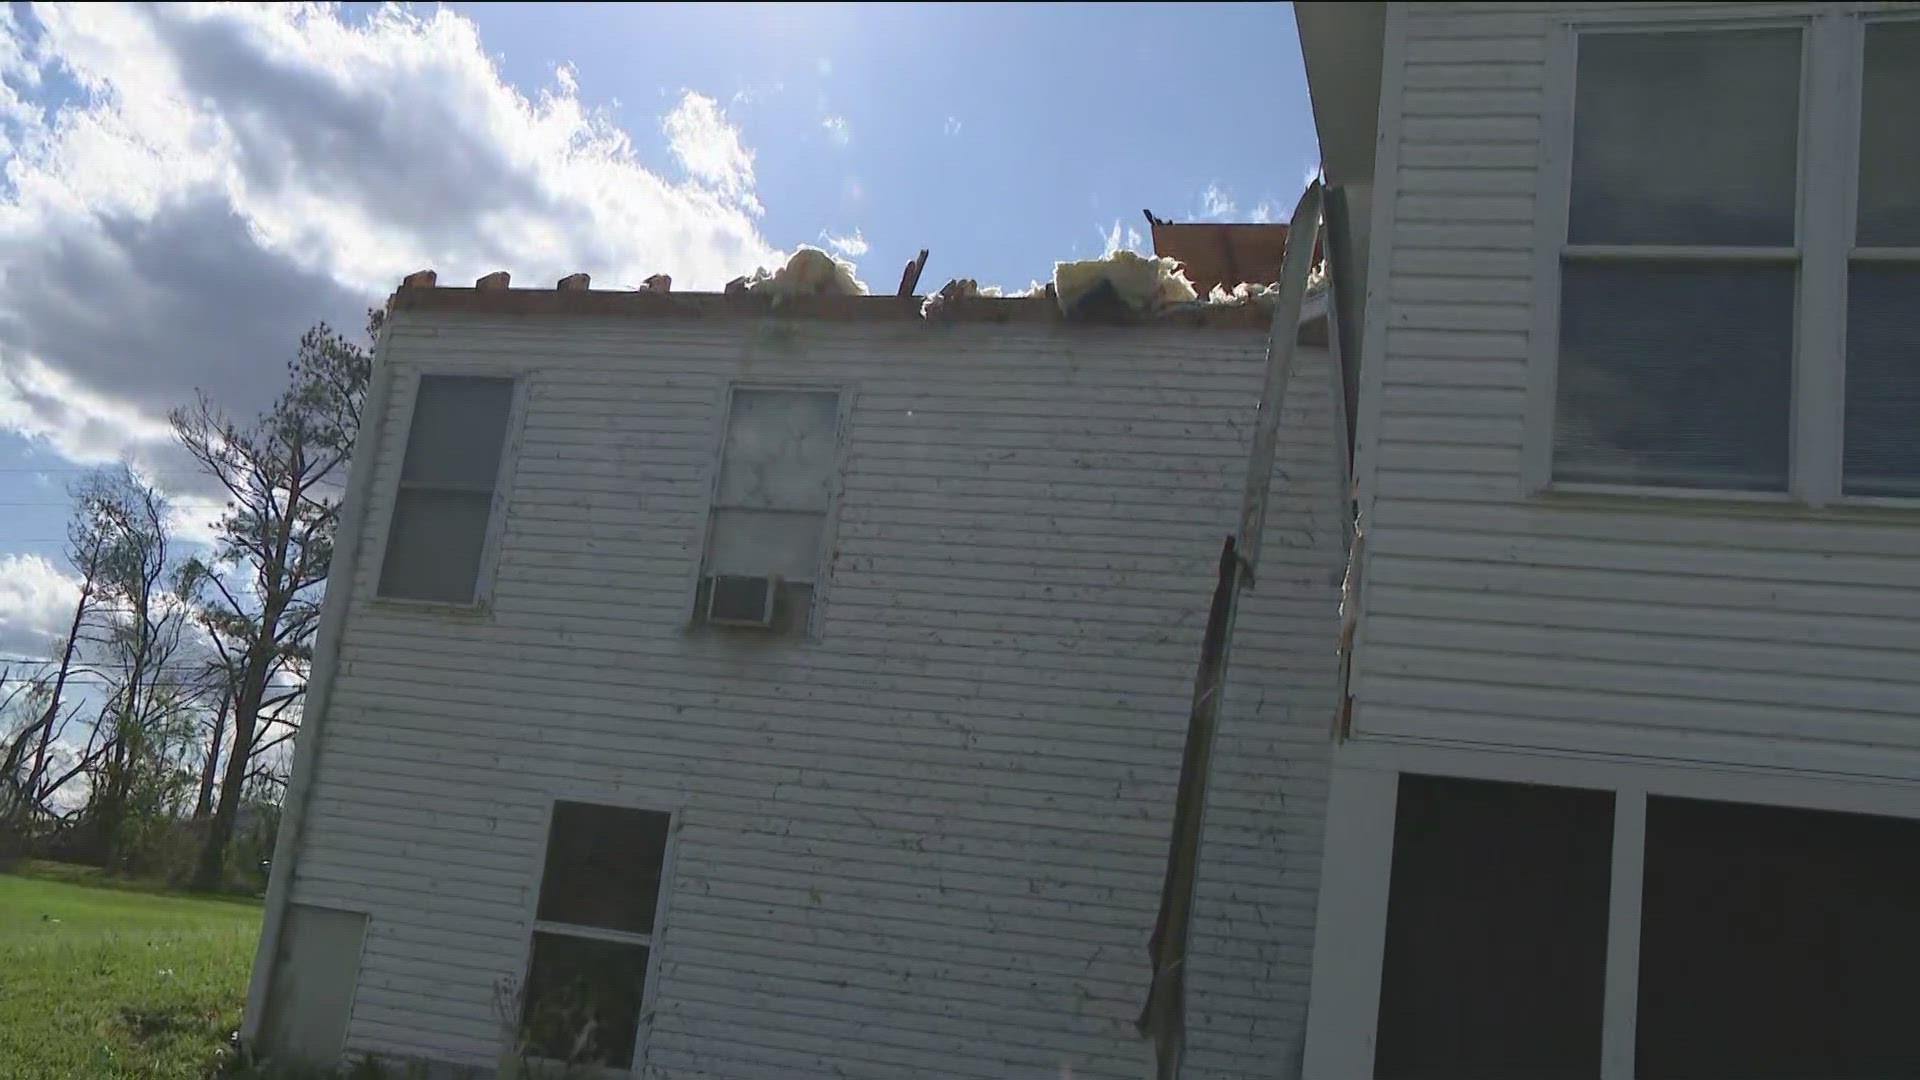 The National Weather Service determined an EF-2 tornado hit the metro Atlanta area after surveying damage on Wednesday.